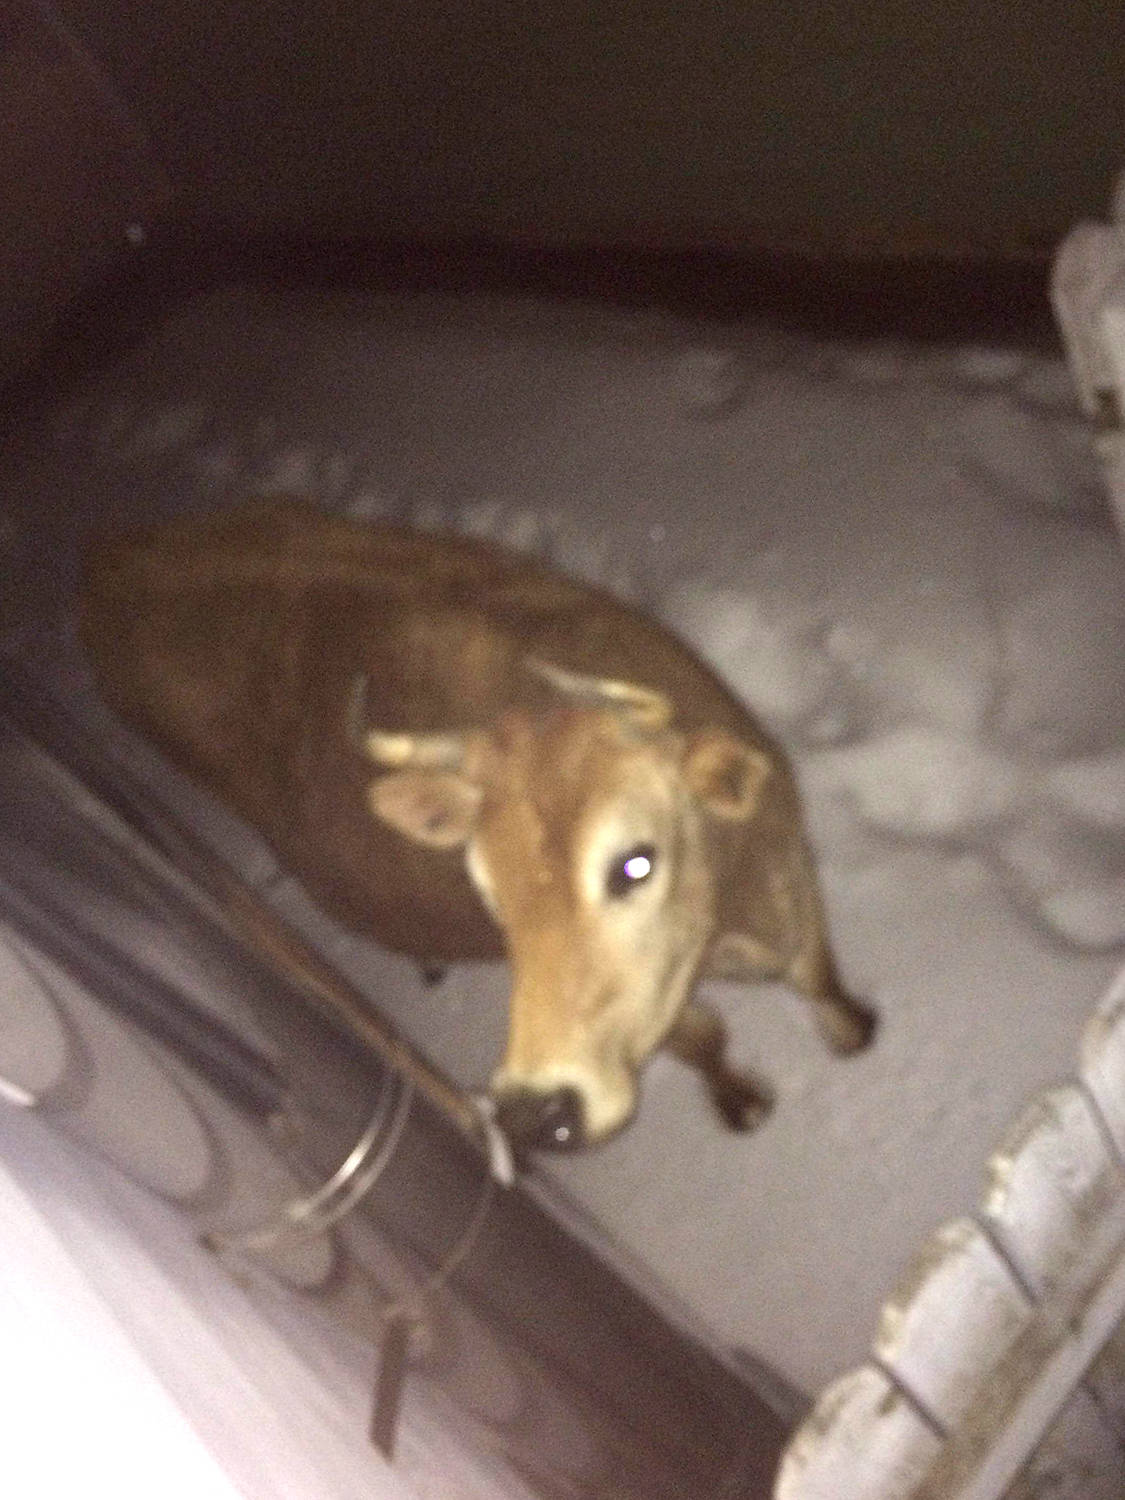 This Jersey cow appears to pose for the camera after it was located in the backyard of a Ponoka resident’s home on Saturday evening. Crews collected the animal safely, which was then taken to VJV Auction Mart.                                Photo courtesy of Cyrus Thompson